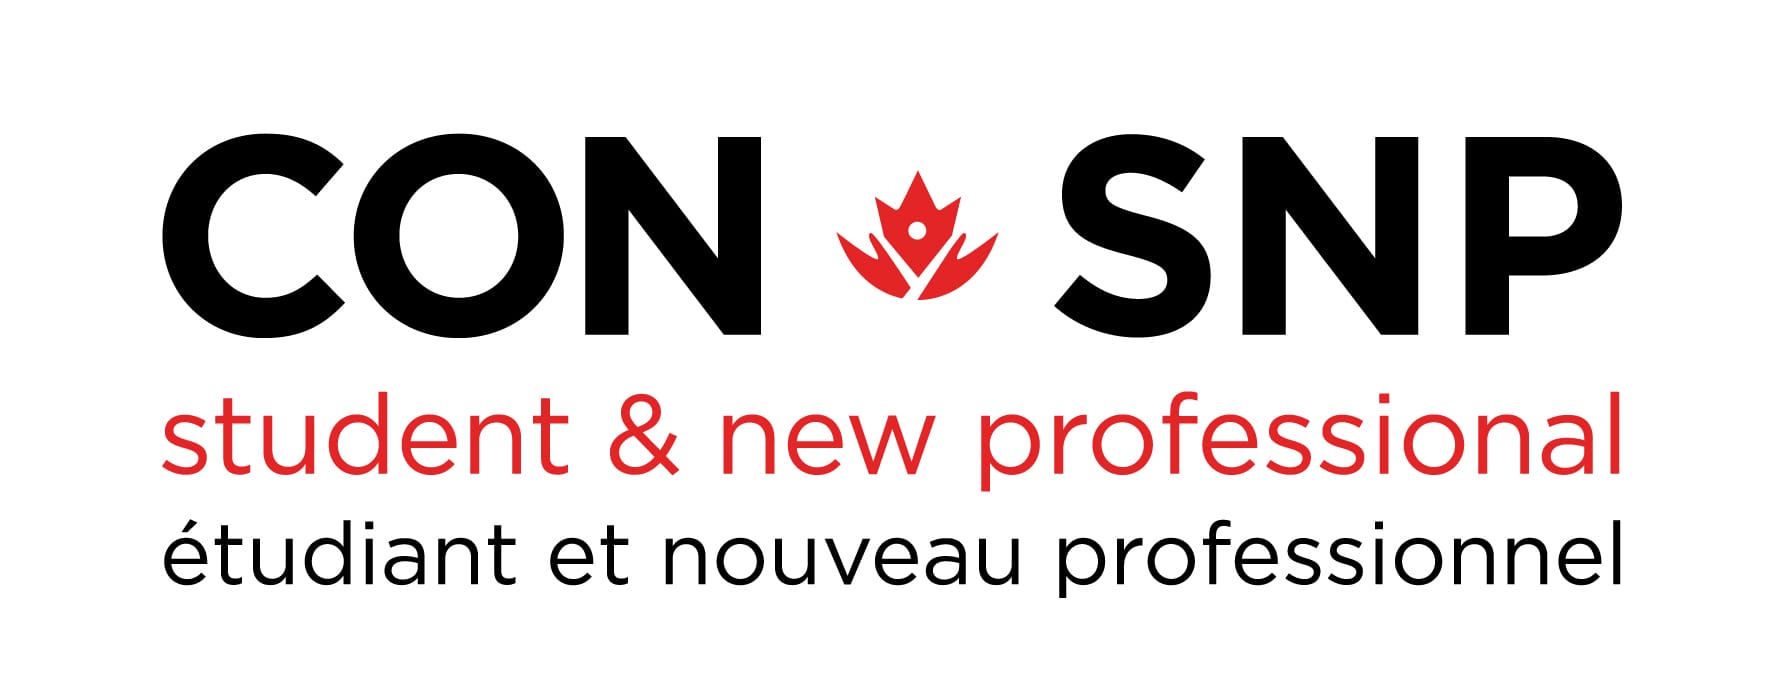 Logo of con snp, including text "student & new professional" in english and french, with a red maple leaf above the letter 'o'.